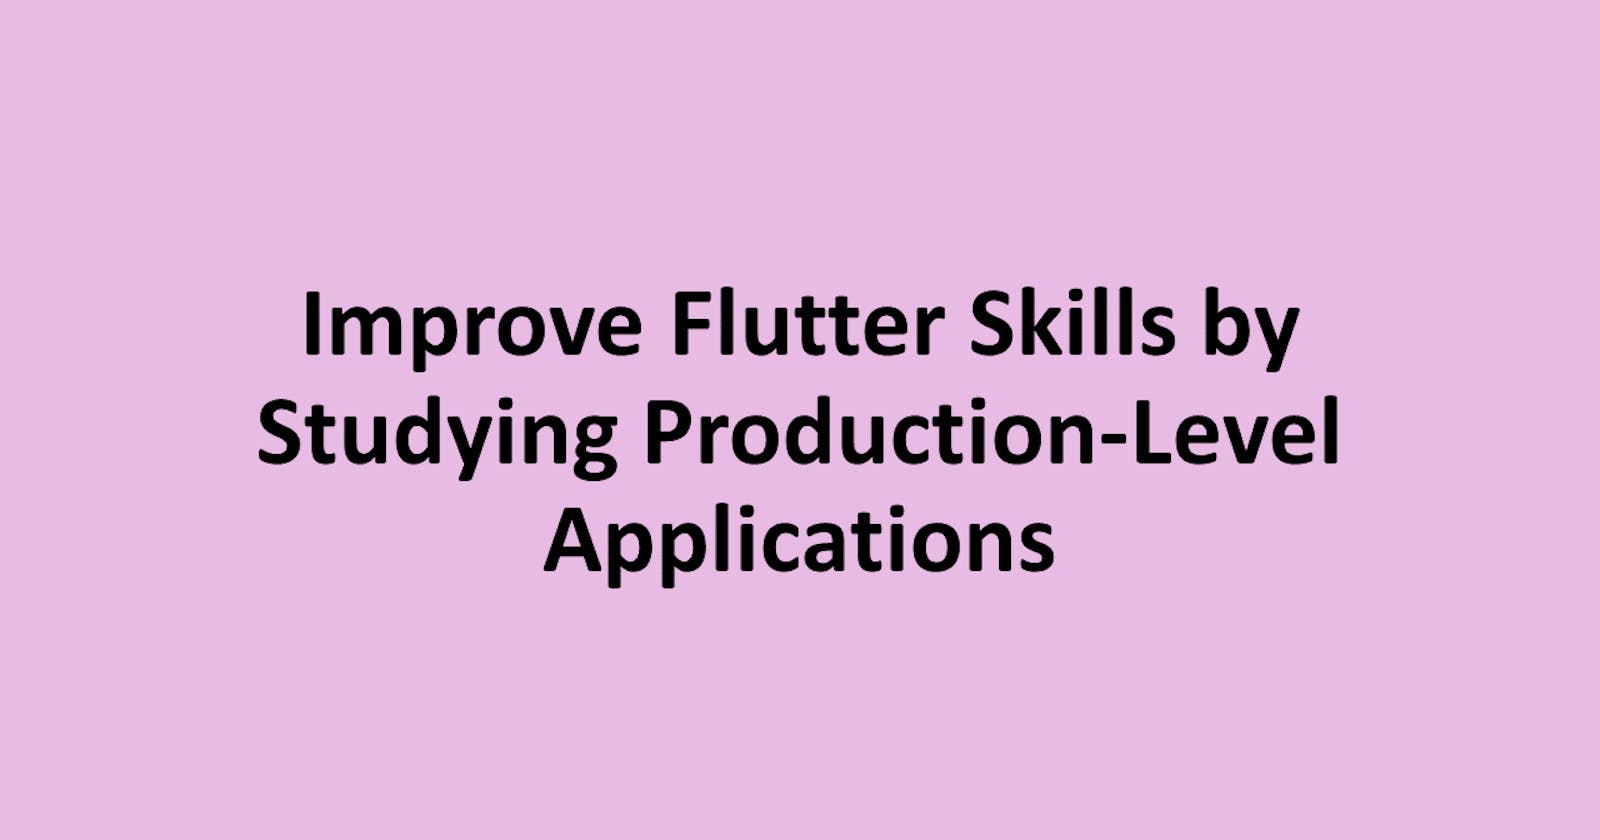 Improve Flutter Skills by Studying Production-Level Applications